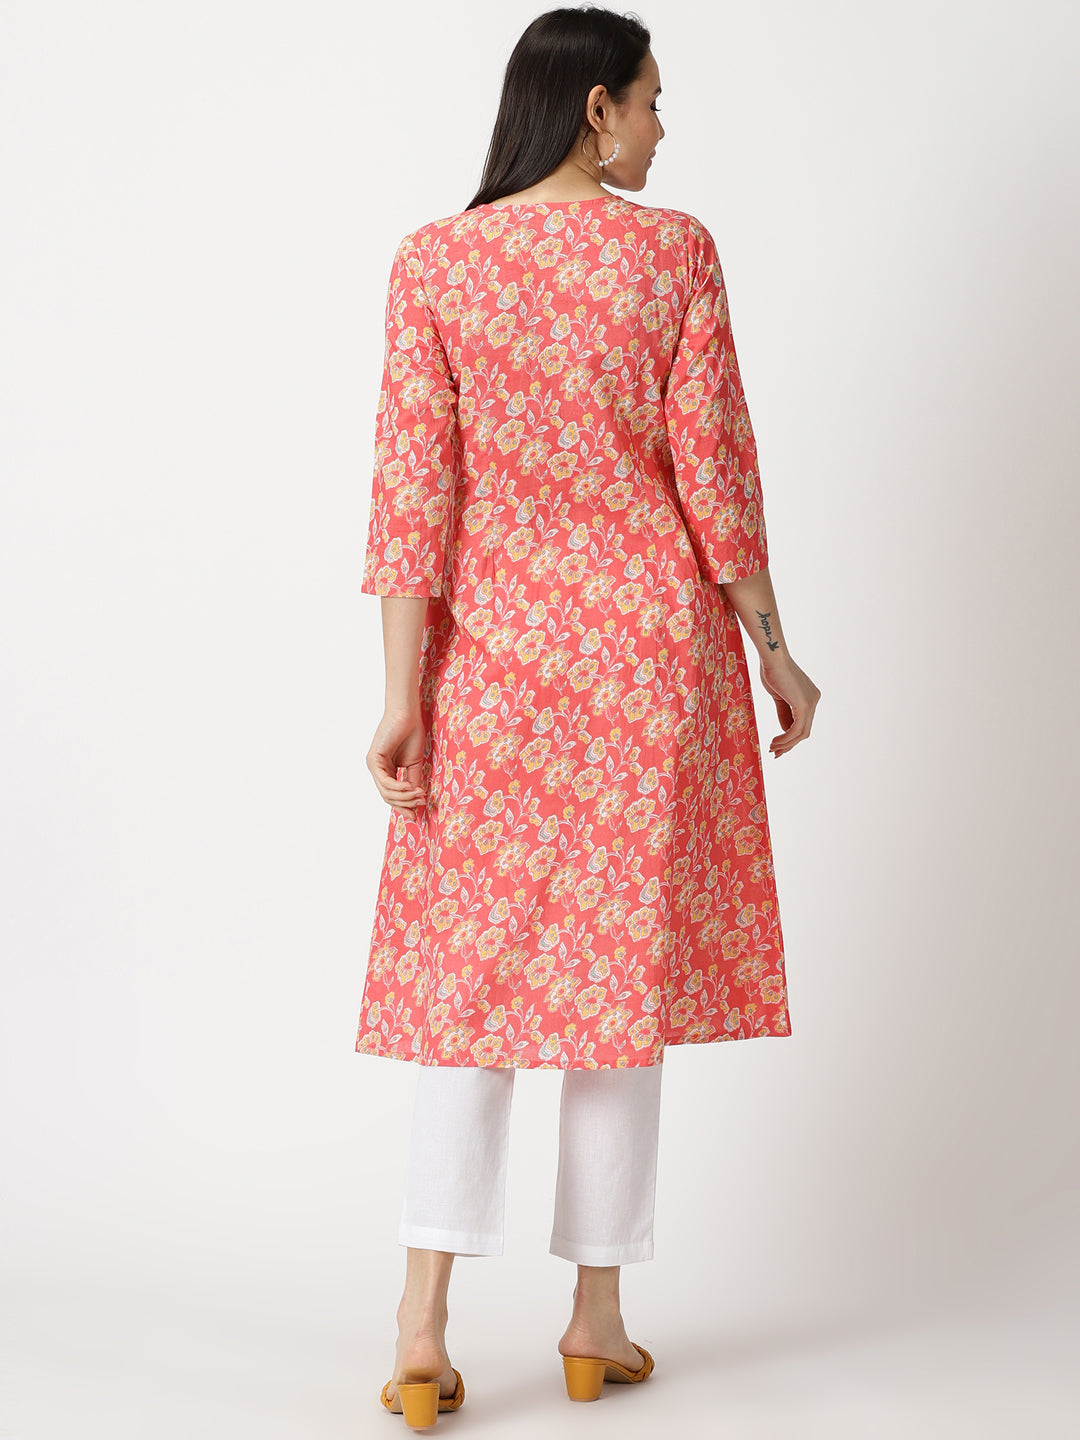 Coral Floral Print A-line Kurta with Lucknowi Chikankari Embroidery